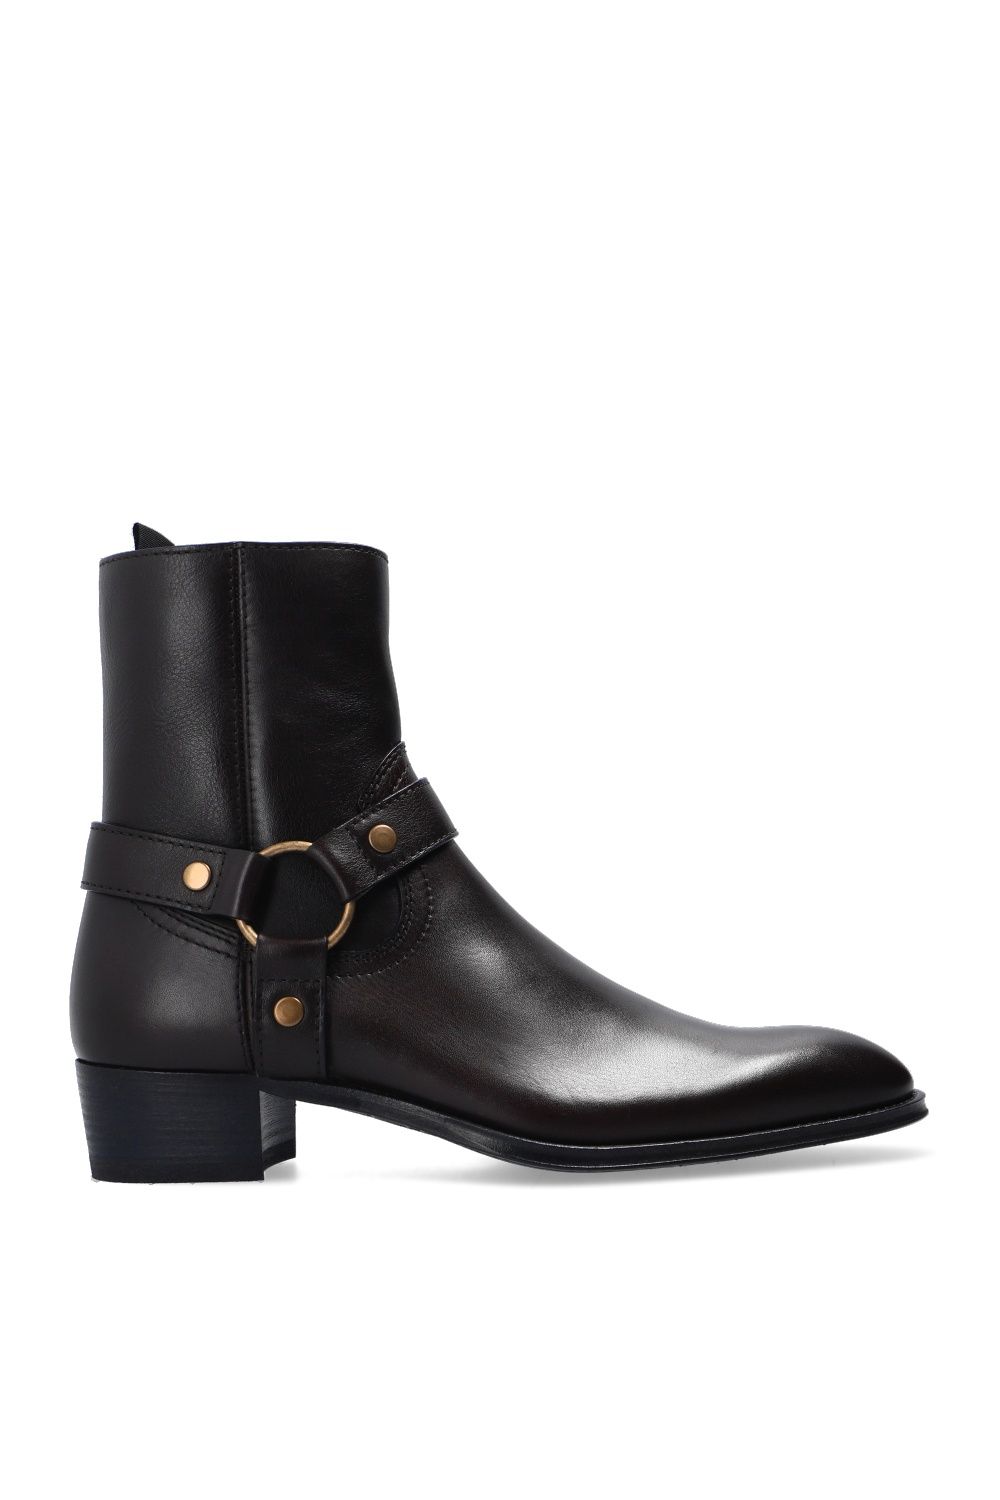 Pre-owned Saint Laurent Wyatt Harness Boots In Smooth Leather In Brown